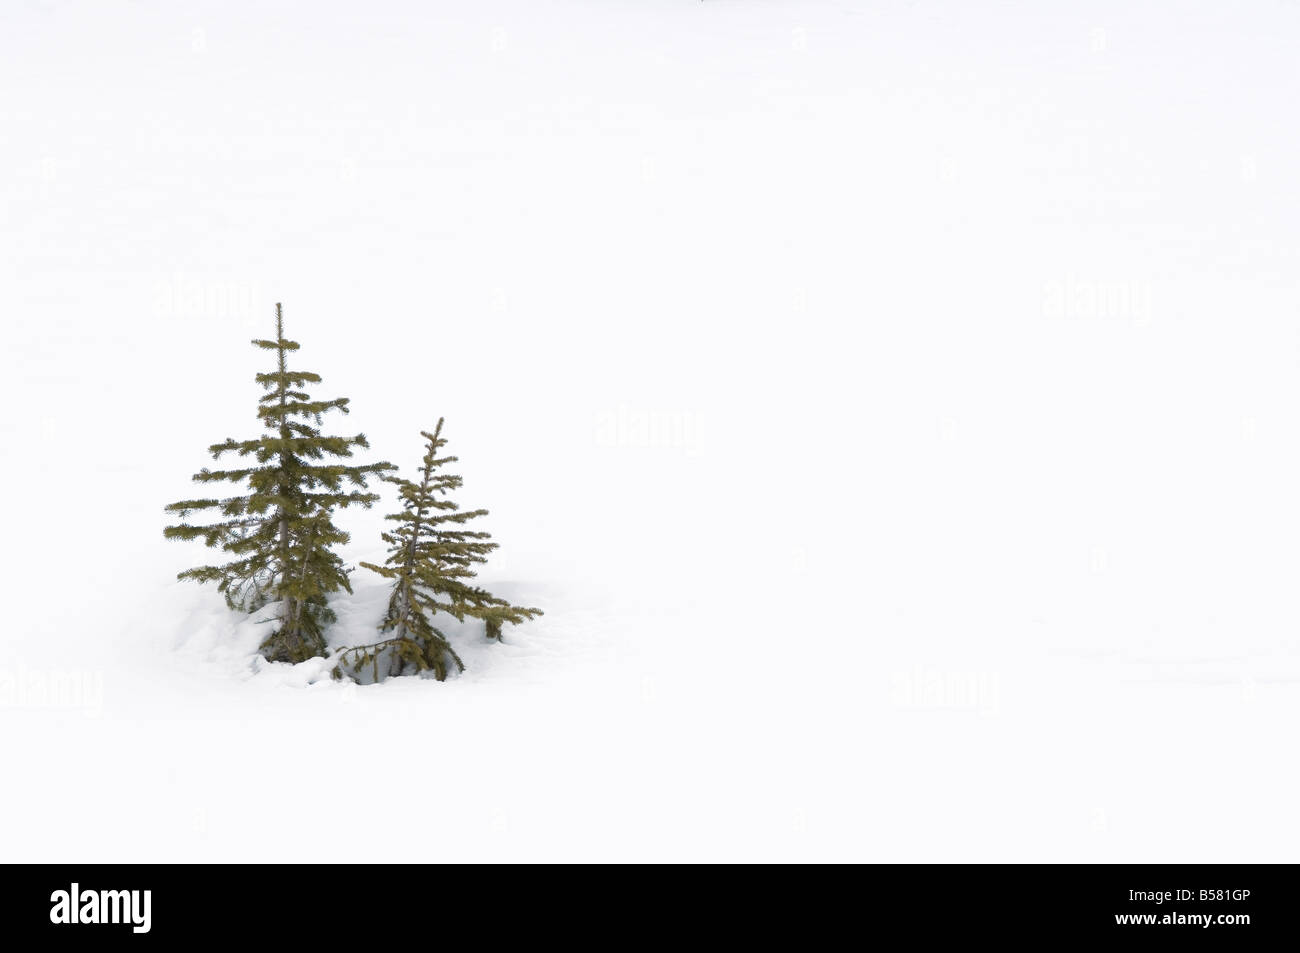 Christmas outdoor scene of snow and pine trees Stock Photo